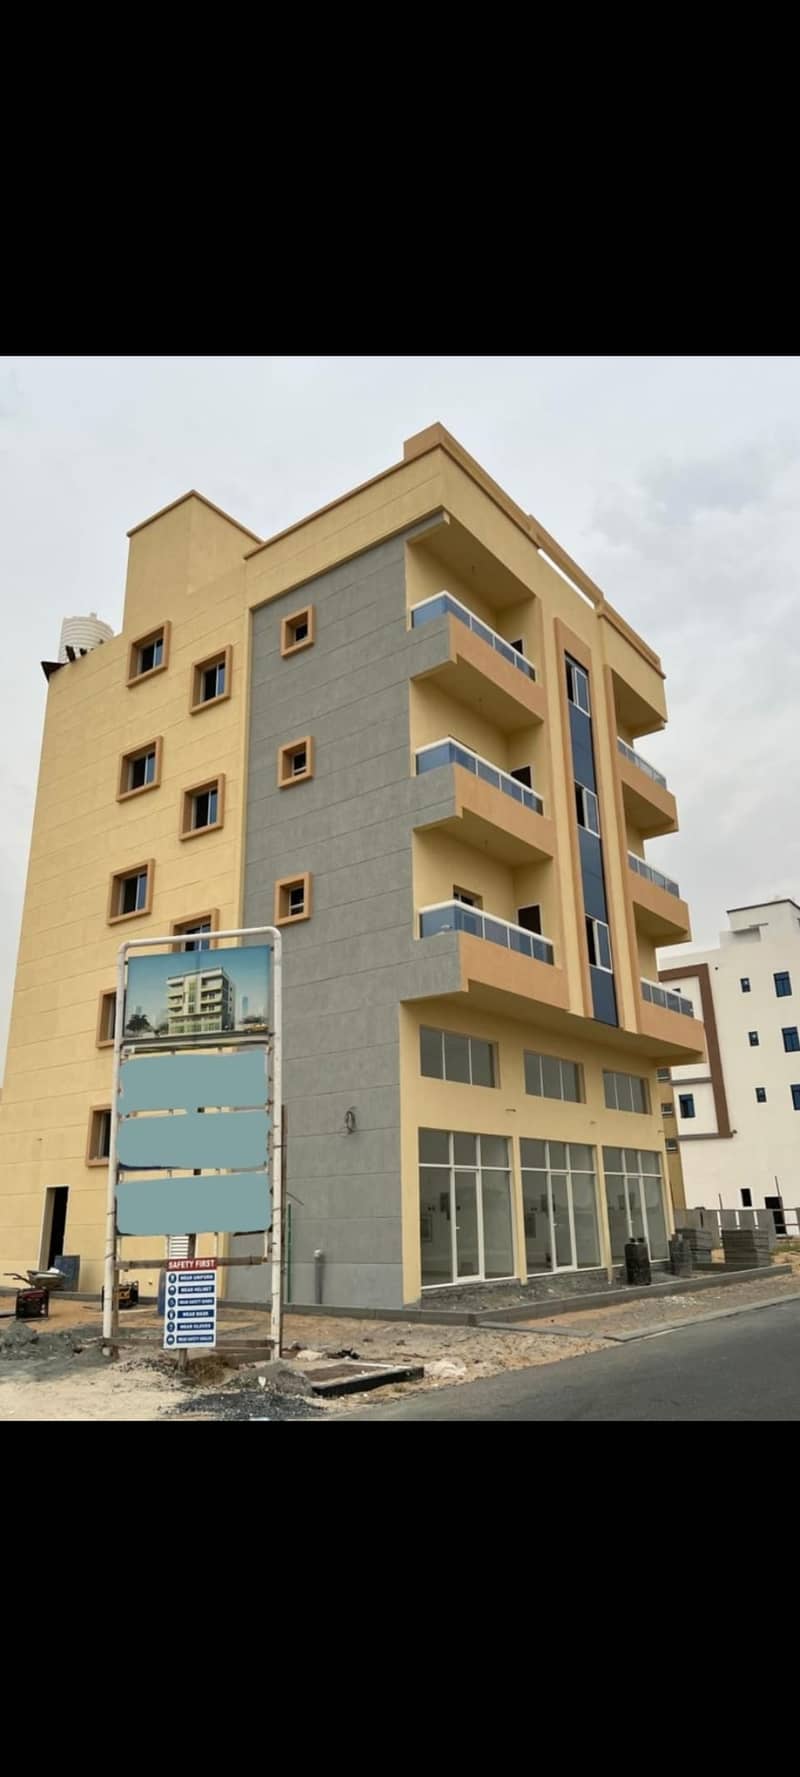 Building for sale in Al-Alia
 The area is 3000 feet
  Ground, mezzanine and 3 floors

  descriptors
 3 weighing shops
 3 rooms and a hall
 3 two rooms and a hall
 3 income studio
 The expected 230,000 thousand